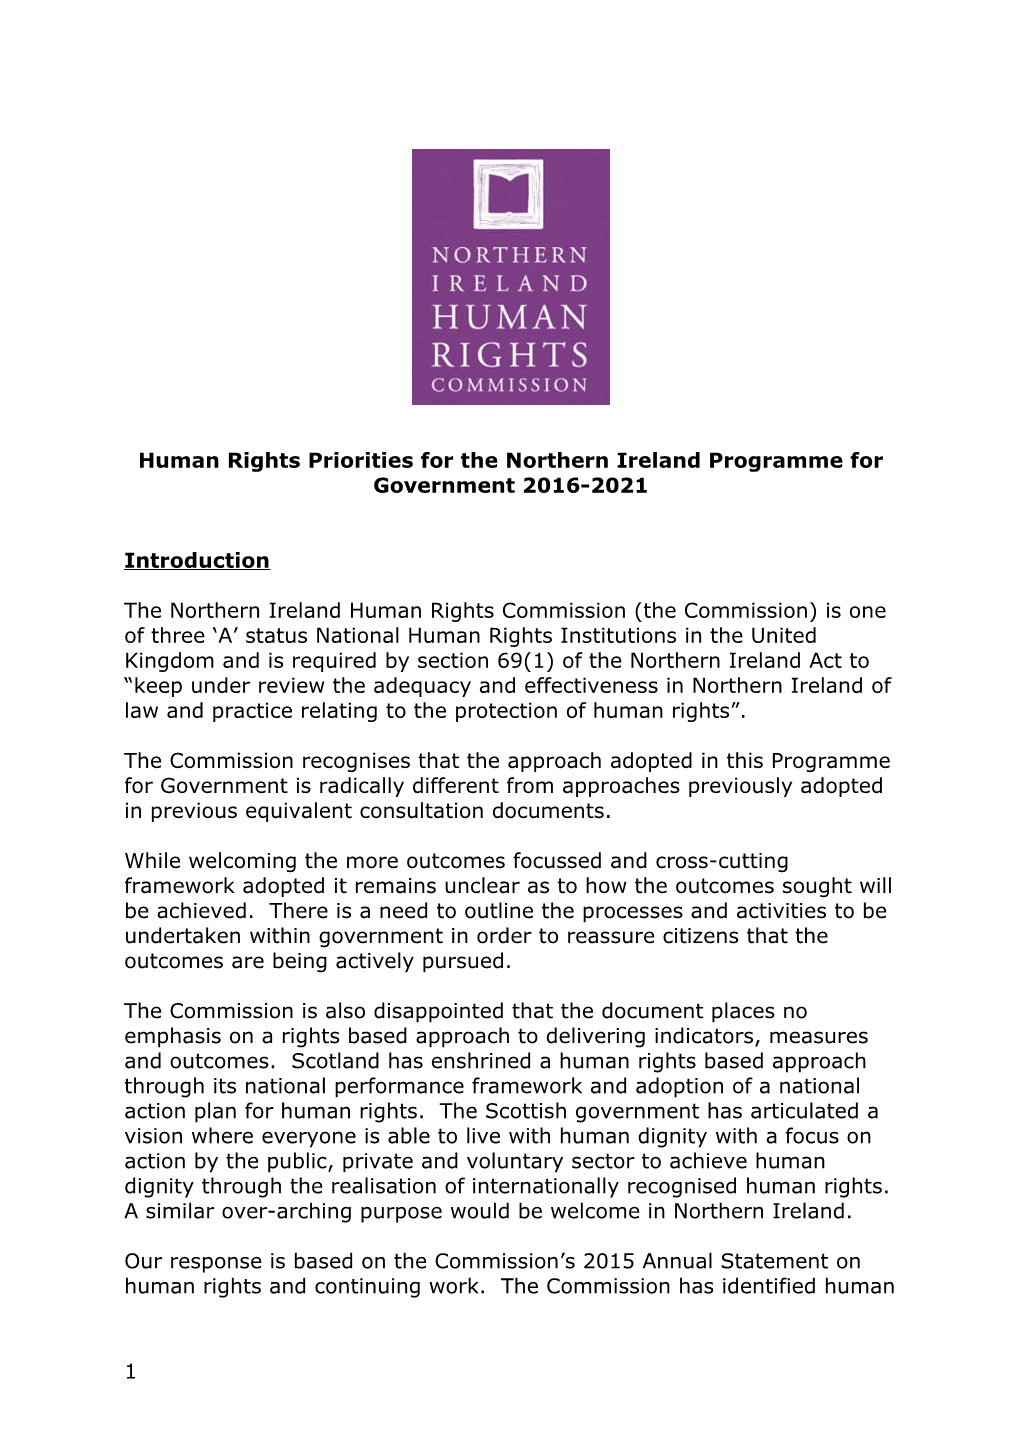 Human Rights Priorities for the Northern Ireland Programme for Government 2016-2021